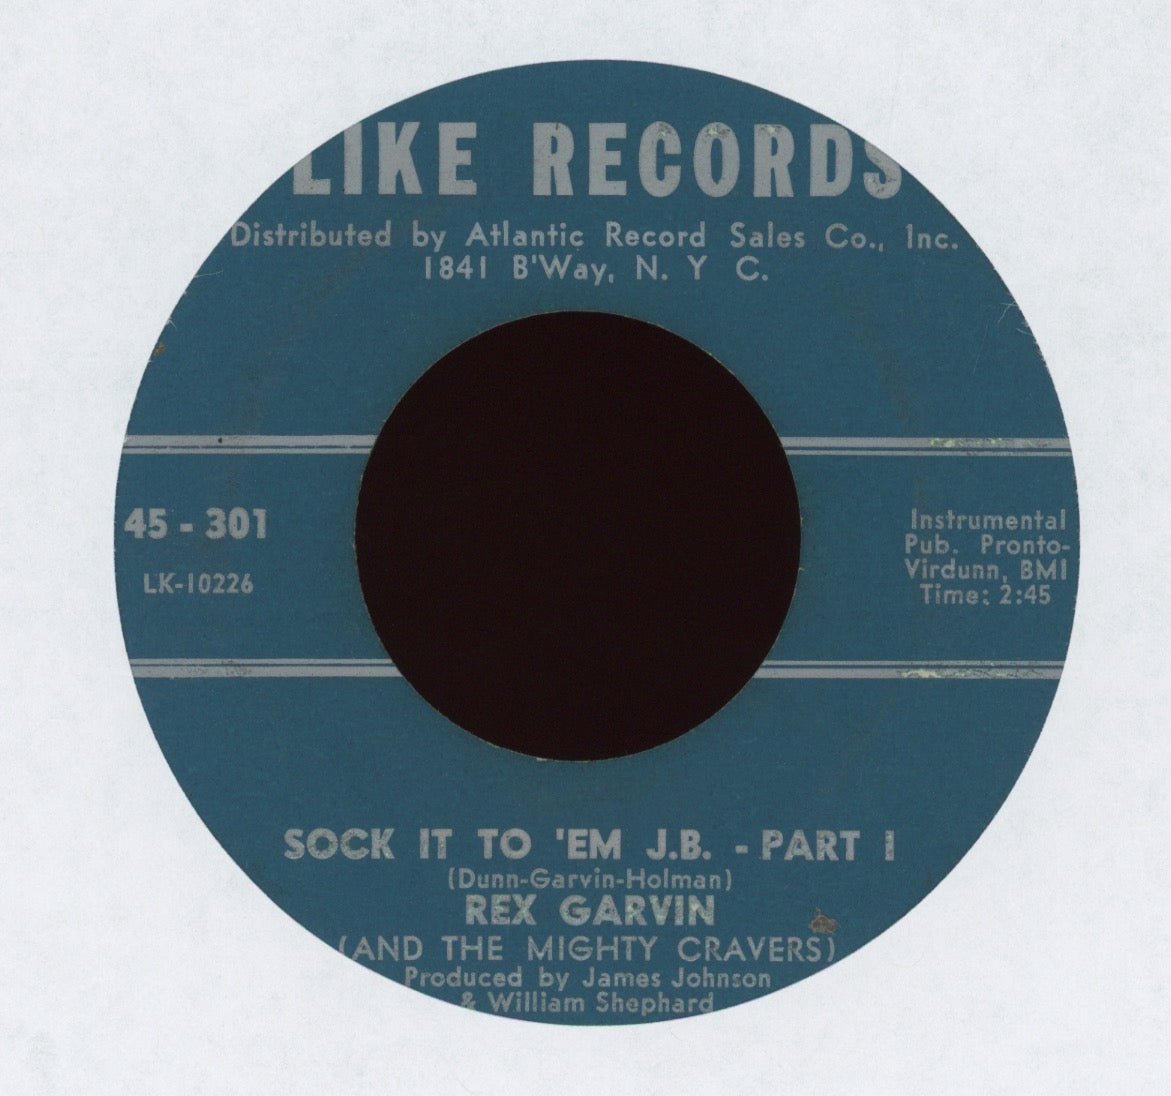 Rex Garvin & The Mighty Cravers - Sock It To 'Em J.B. on Like Northern Soul 45